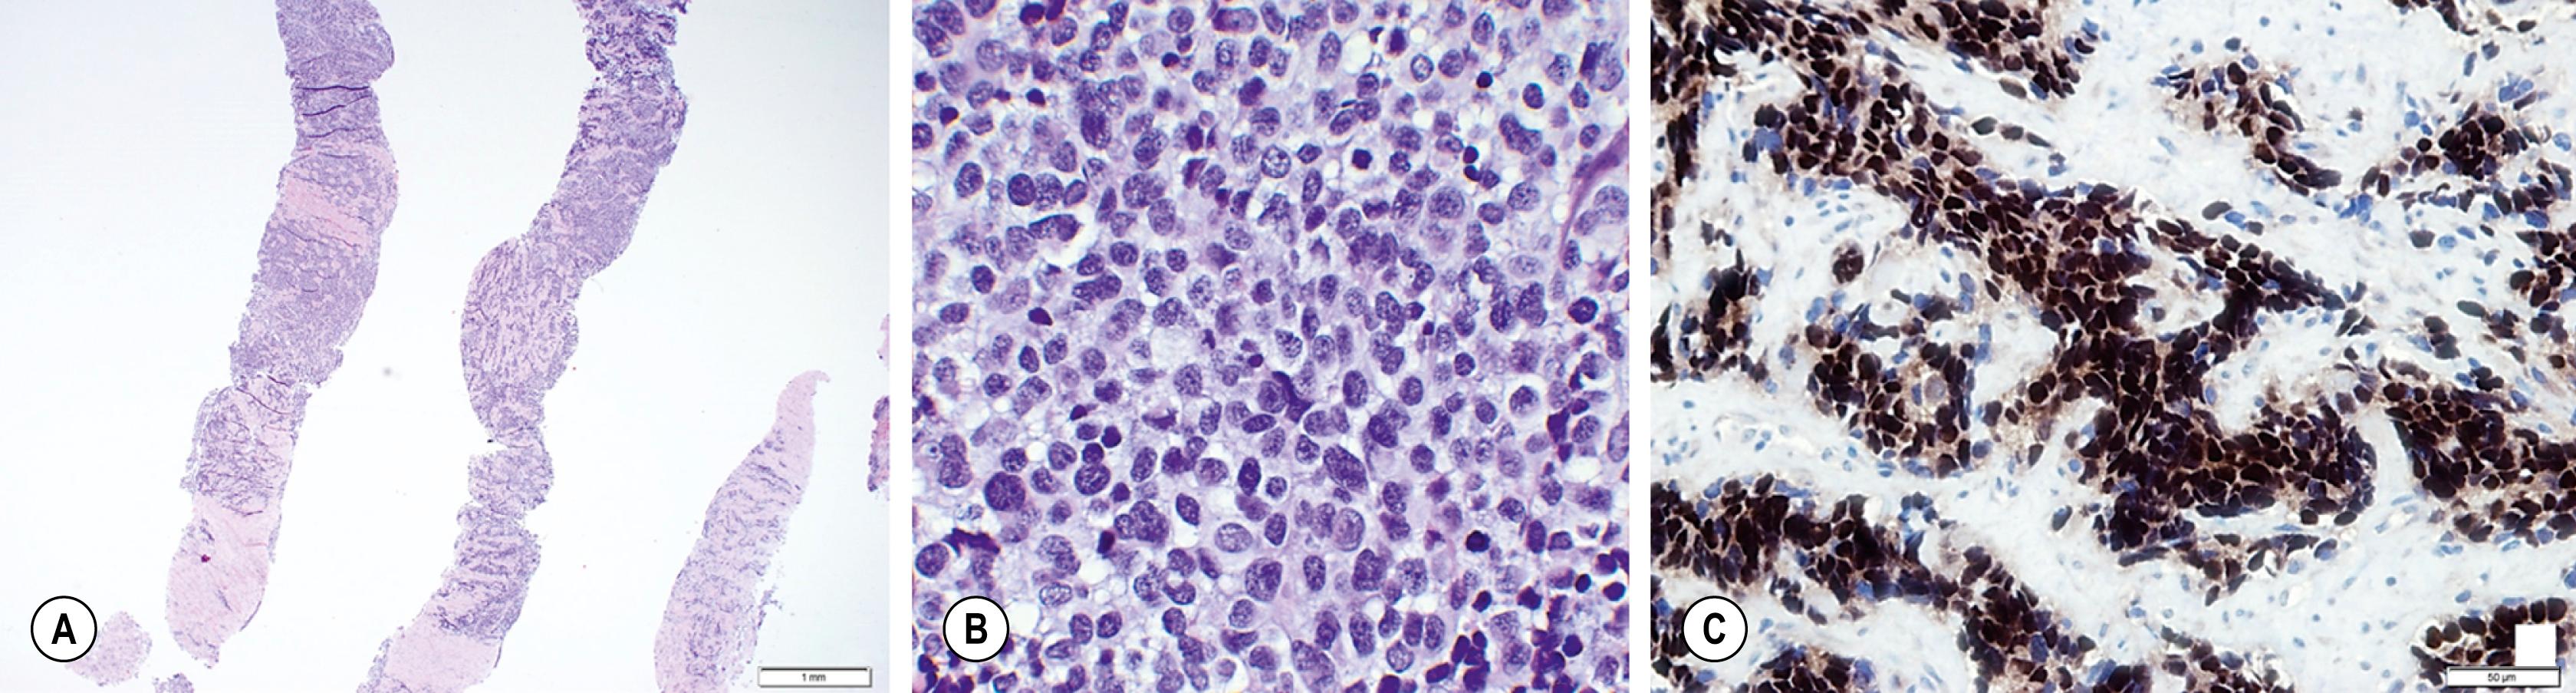 Fig. 69.2, Alveolar rhabdomyosarcoma. Needle core biopsy sample from a soft tissue arm mass from a teenage girl (A) . A highly cellular “small, round blue cell neoplasm” is seen infiltrating the connective tissue in skeletal muscle (H&E stain). (B) At high power, tumor cells are tightly packed, with variably molding cell membranes, small to moderate amount of delicate cytoplasm, relatively uniform round nuclei, delicate to “salt-and-pepper” chromatin, mostly inconspicuous nucleoli, and scattered mitoses (H&E stain). (C) Immunohistochemical stain for myogenin strongly highlights the nuclei of the overwhelming majority of infiltrating densely packed tumor cells. In contrast, nuclei of the collagenous connective tissue in the background remain appropriately negative.